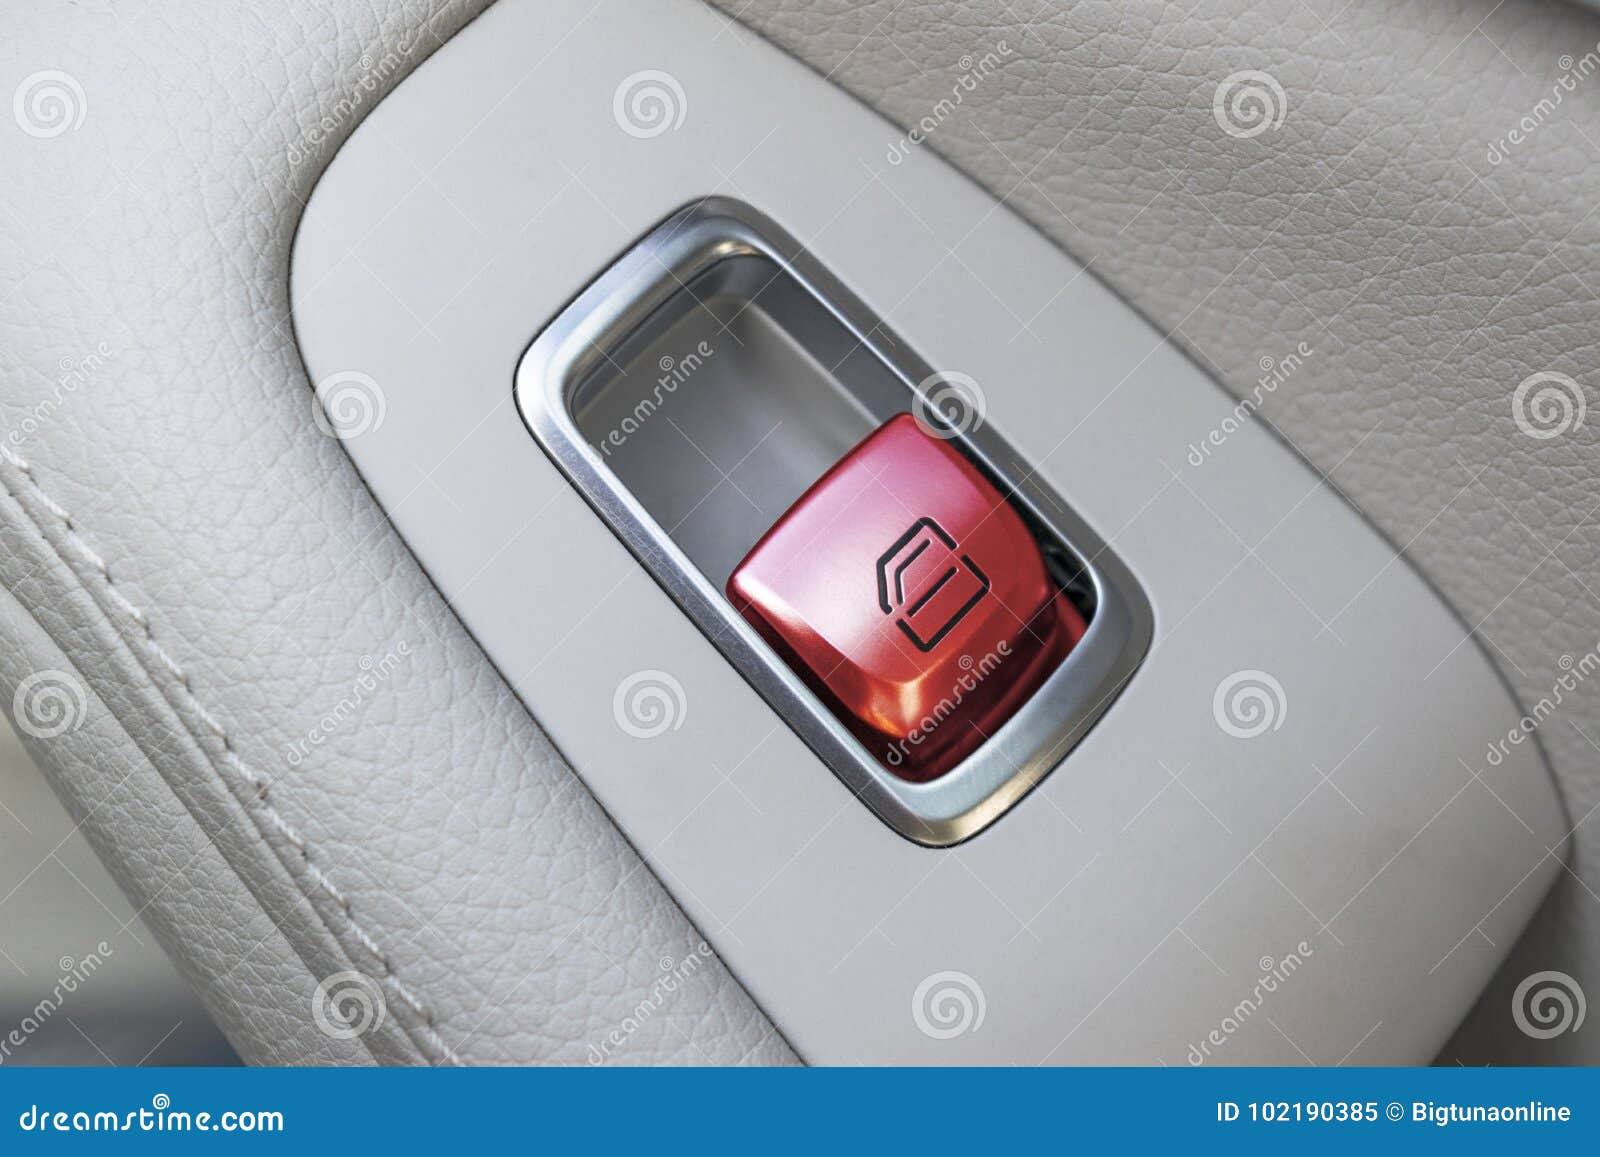 Car White Leather Interior Details Of Door Handle With